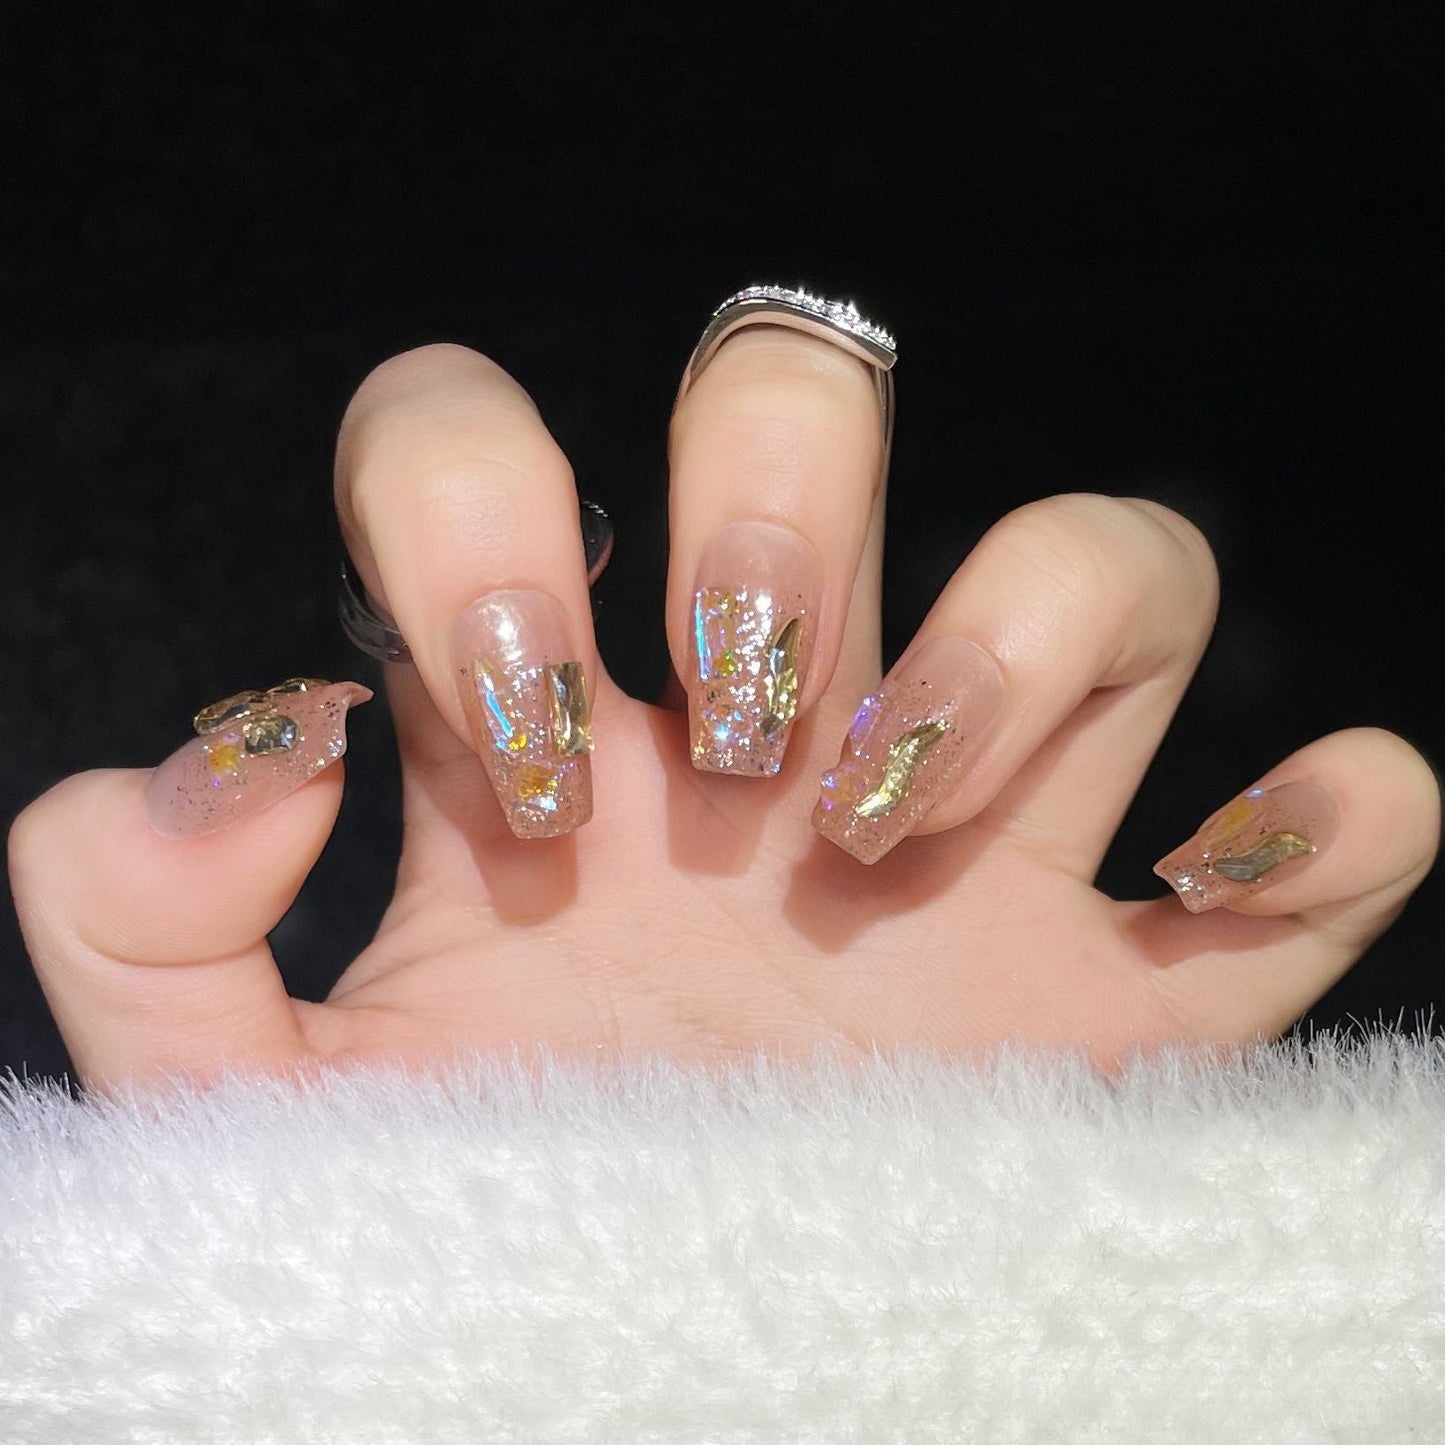 1306/1311 Champagne aurora style press on nails 100% handmade false nails nude color